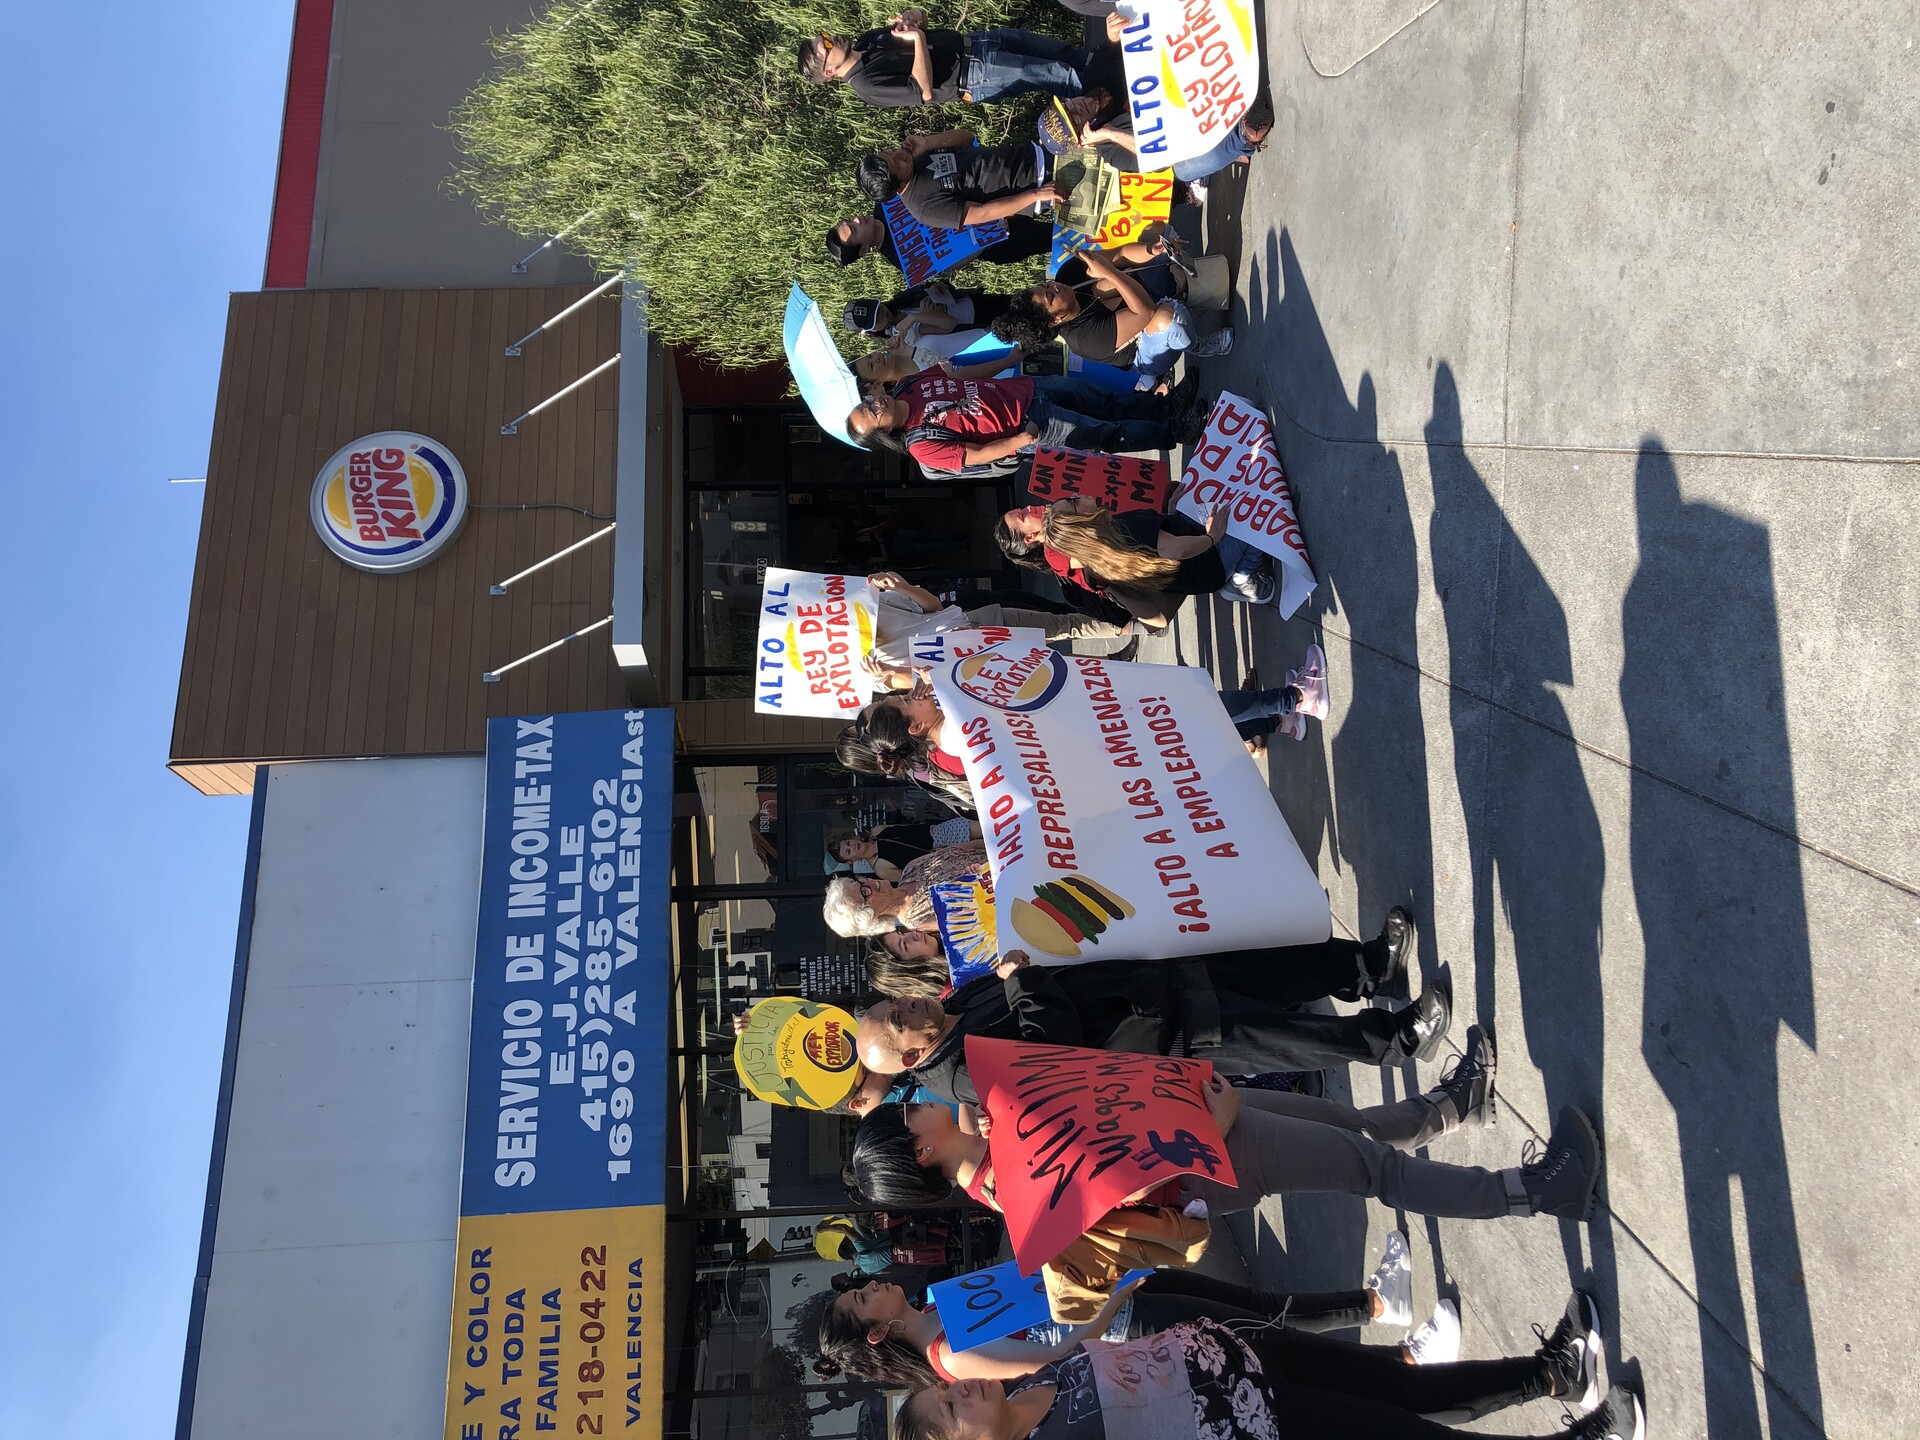 Dozens of men and women holding signs in front of a Burger King franchise in Oakland, California.